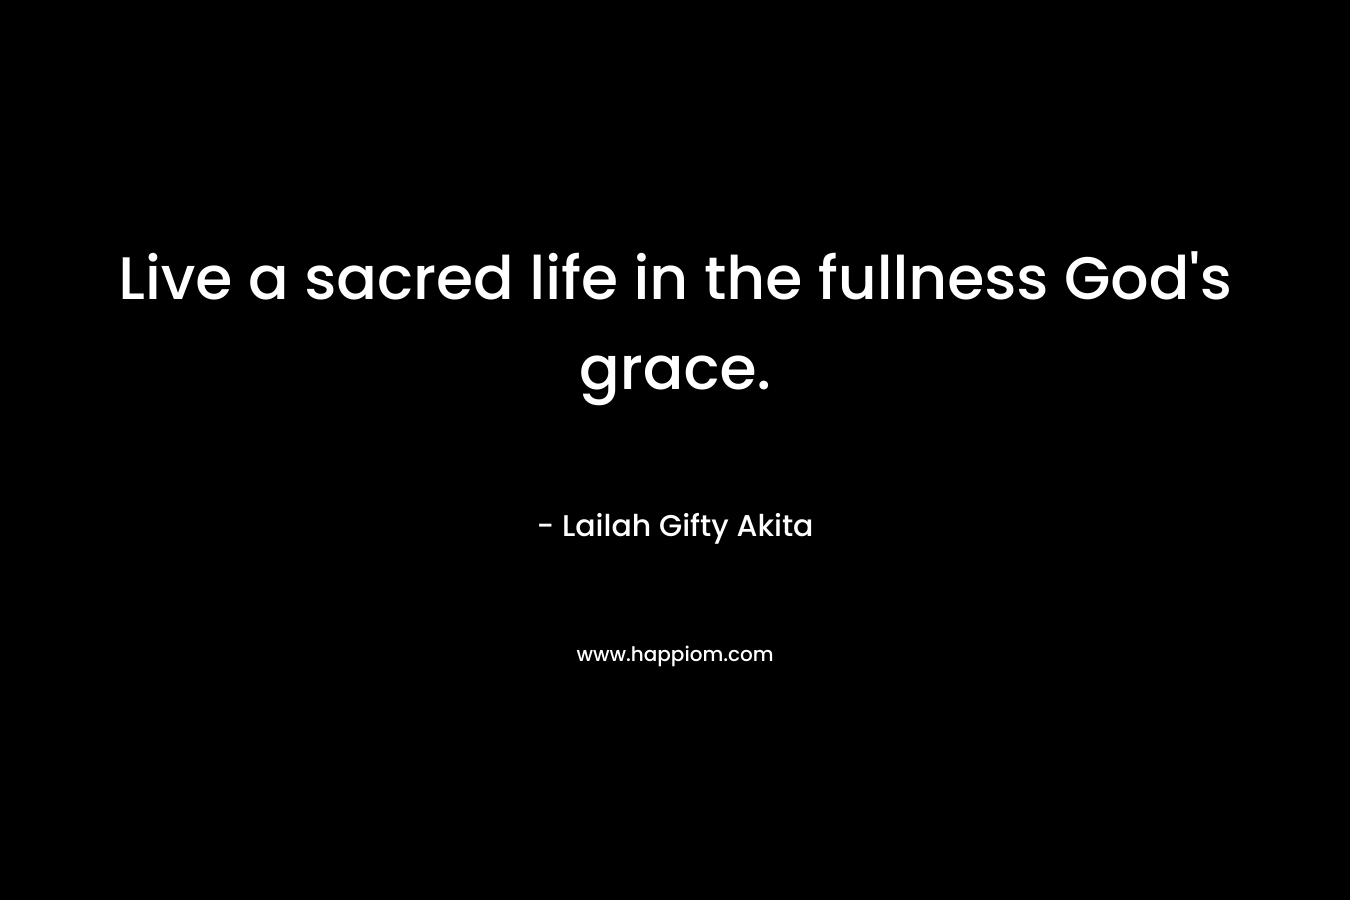 Live a sacred life in the fullness God's grace.